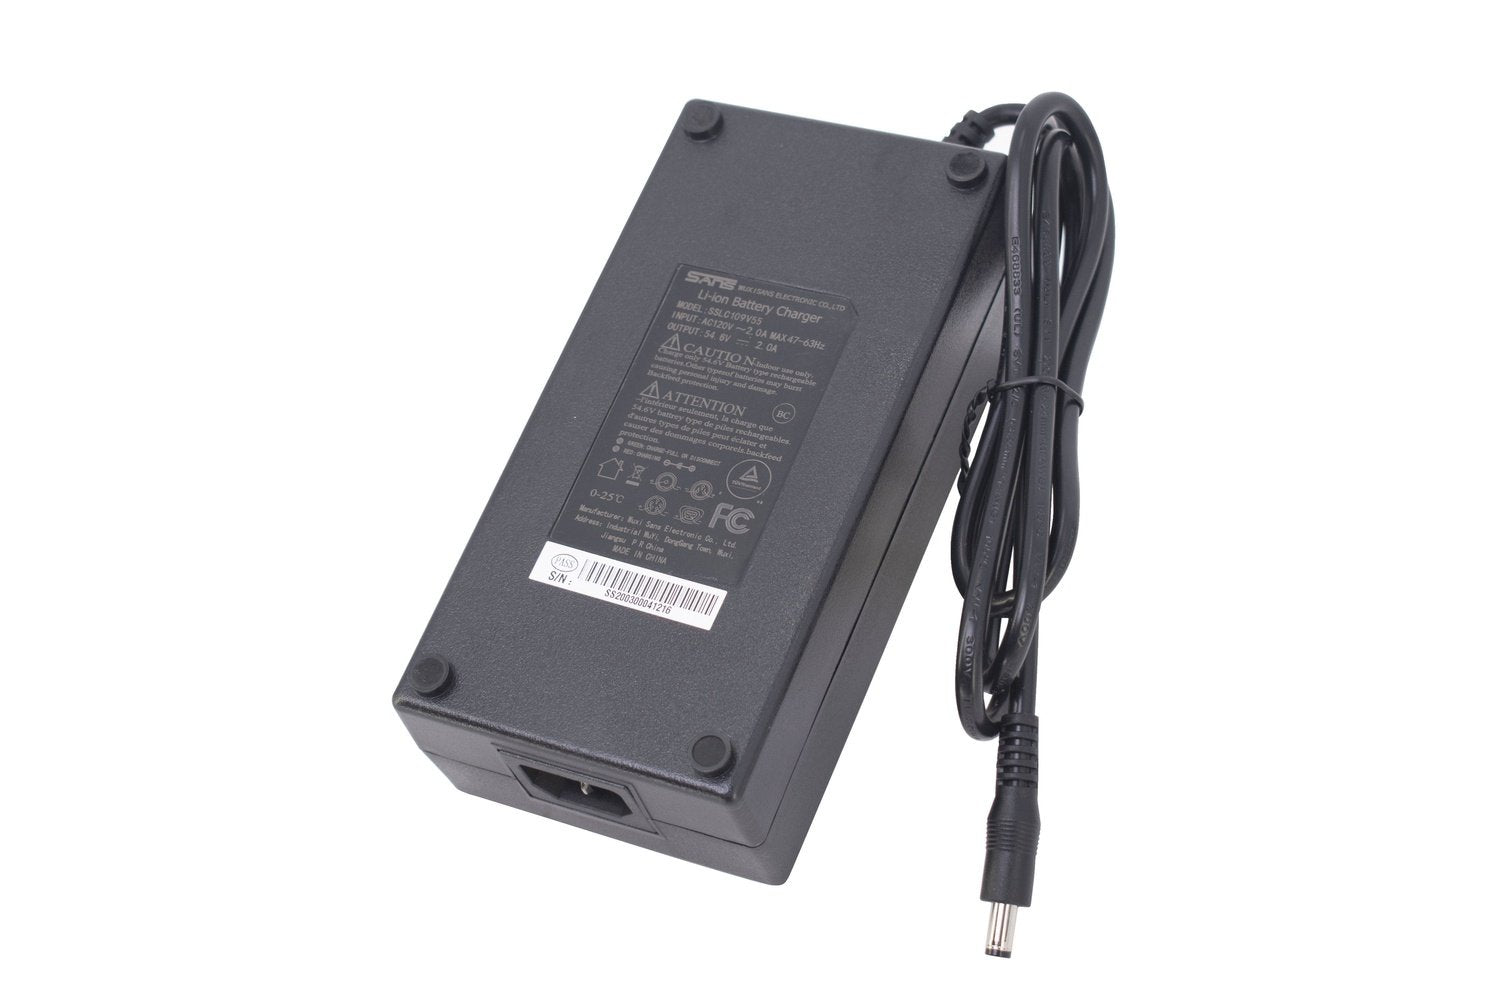 Emmo Canada UL/TUV Certified 48V 2A/3A Lithium Charger - DC Plug